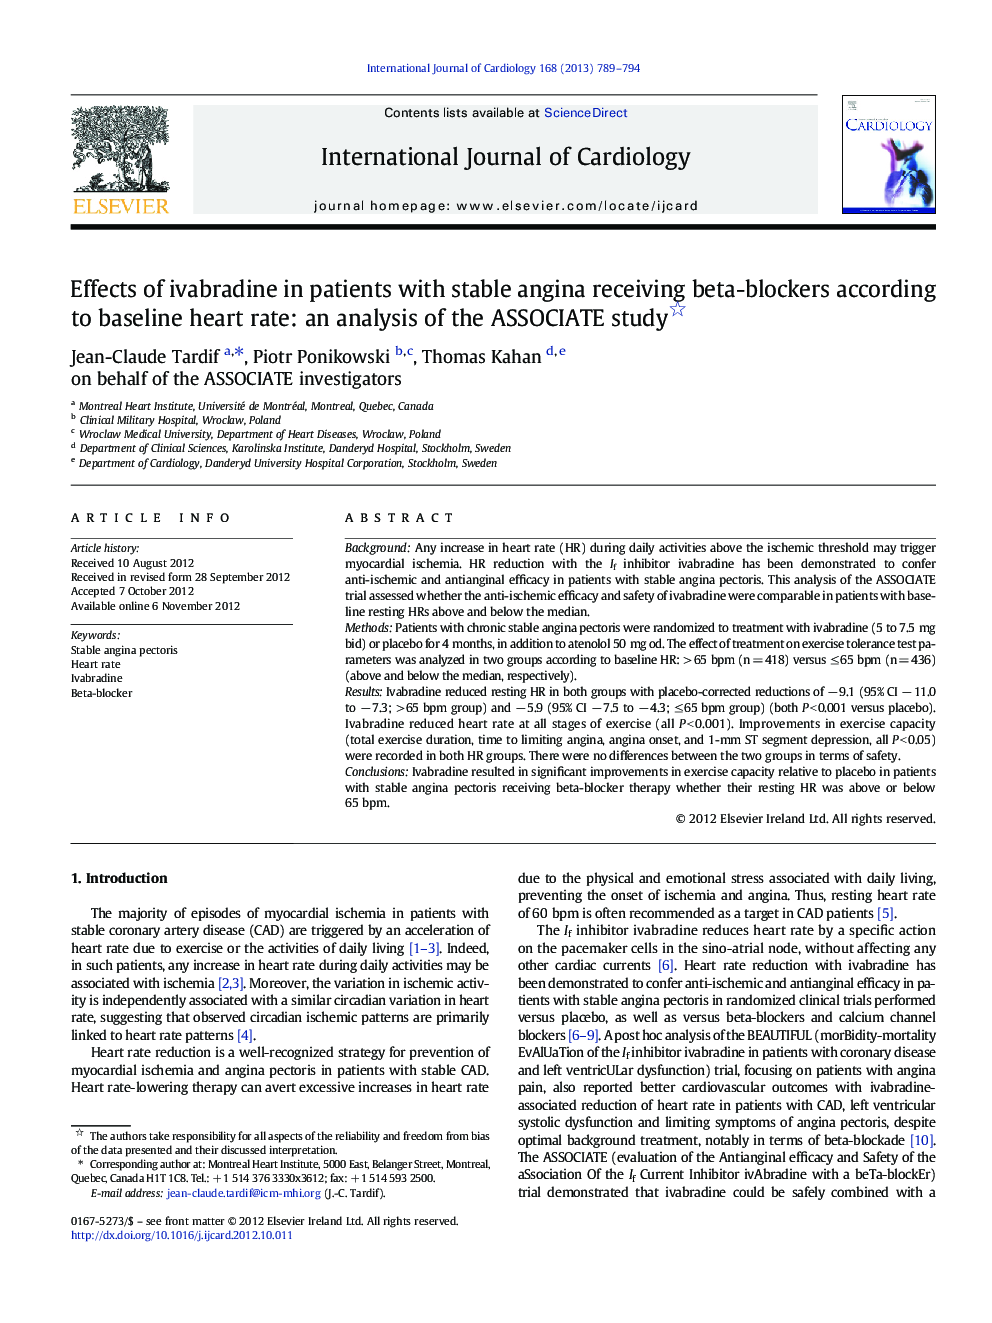 Effects of ivabradine in patients with stable angina receiving beta-blockers according to baseline heart rate: an analysis of the ASSOCIATE study